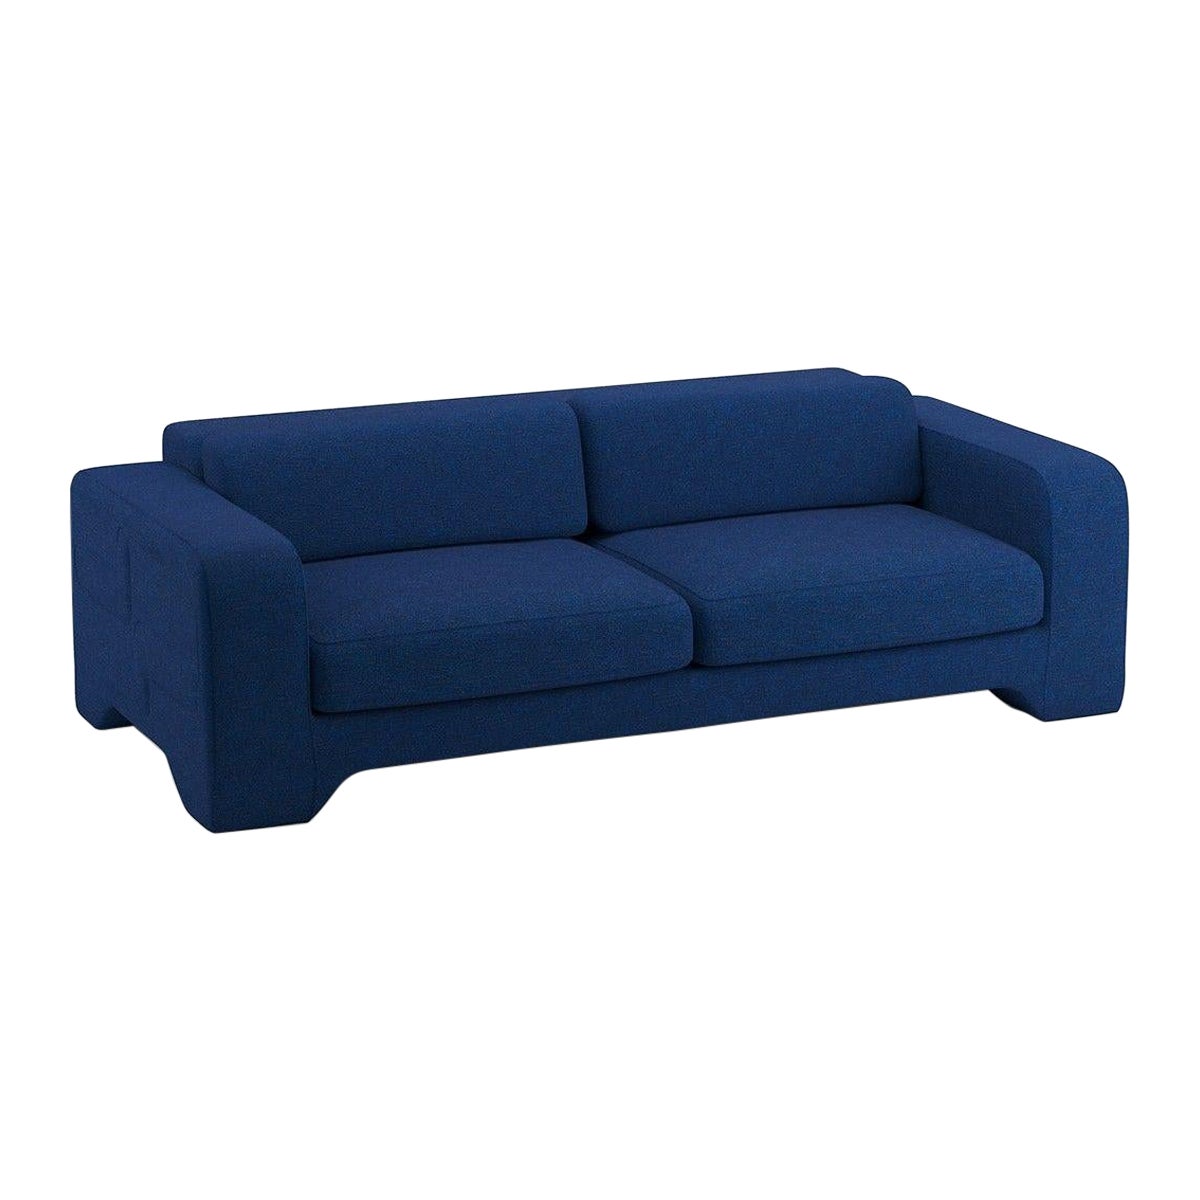 Popus Editions Giovanna 4 Seater Sofa in Ocean Megeve Fabric with Knit Effect For Sale